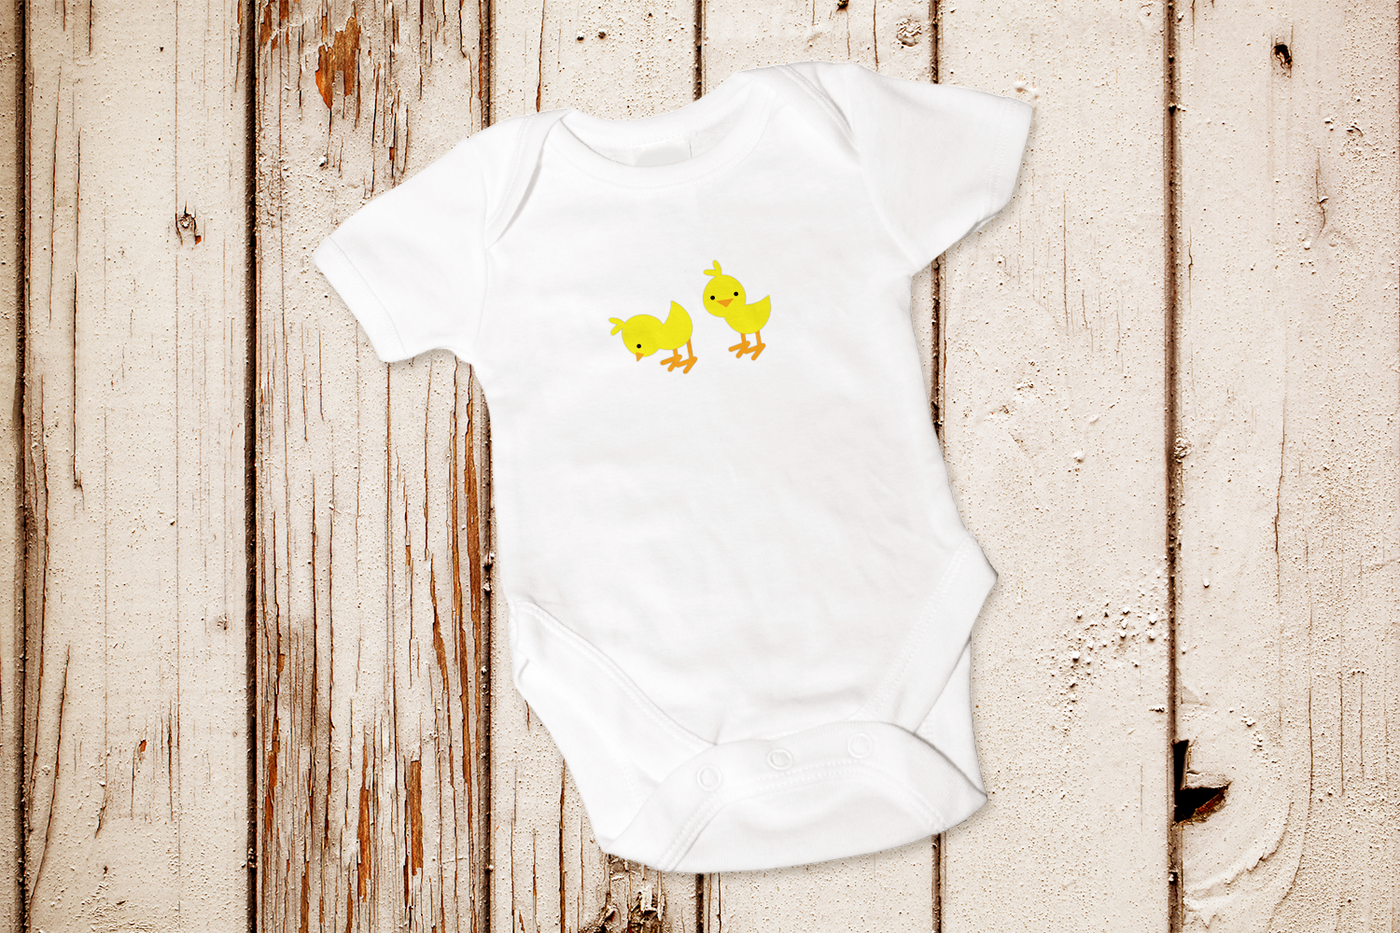 A white baby onesie with two baby chicks.